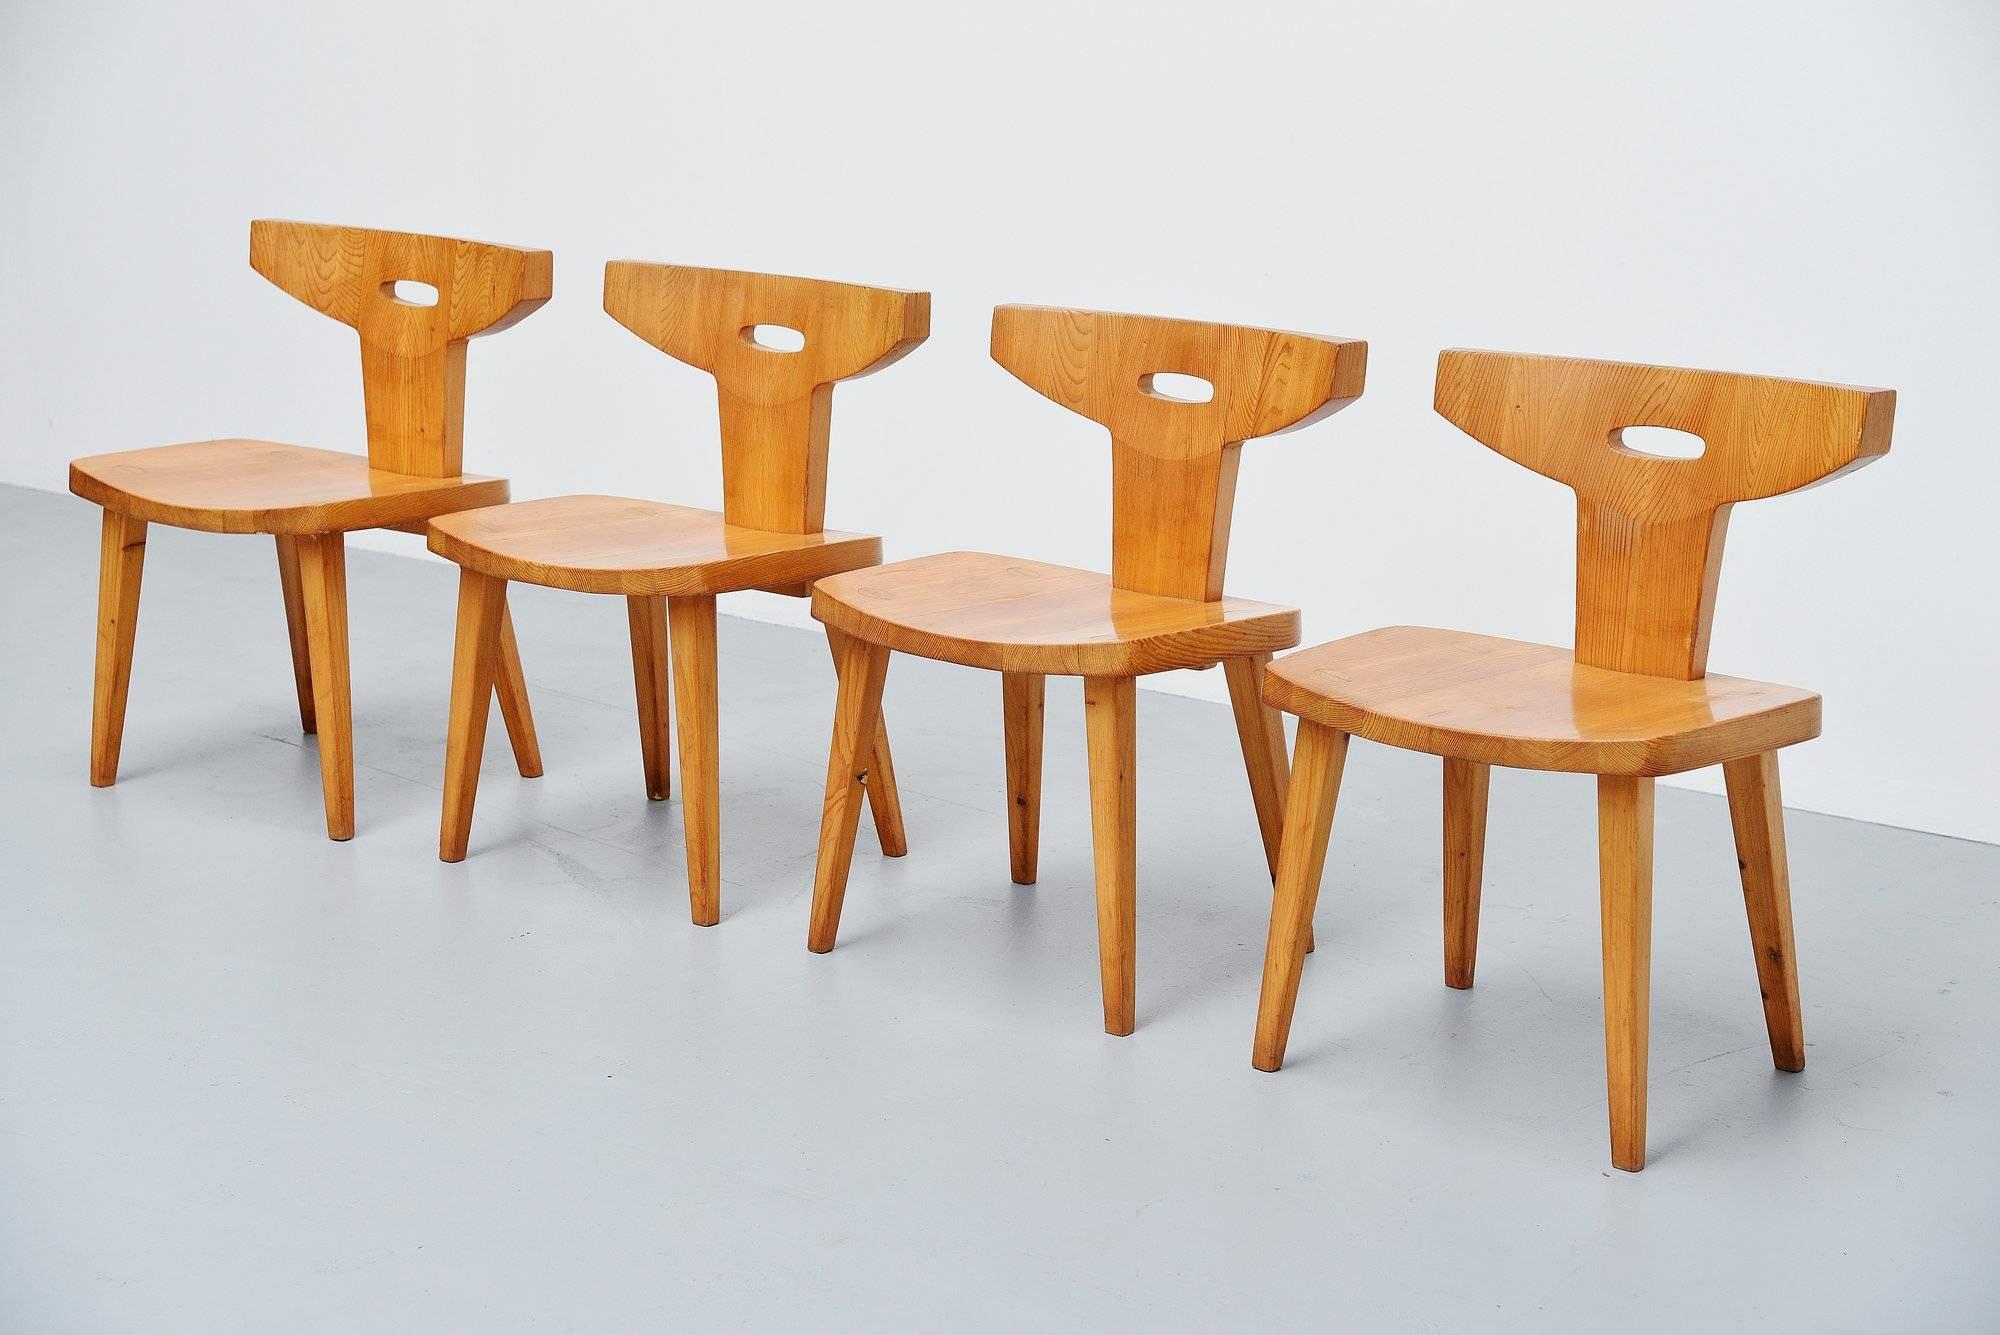 Fantastic set of four dining chairs designed by Jacob Kielland-Brandt, manufactured by I. Christiansen, Denmark 1960. The designer won the Cabinetmaker Guild price in Denmark 1960. Super hand crafted chairs and table in solid pine wood. Amazing